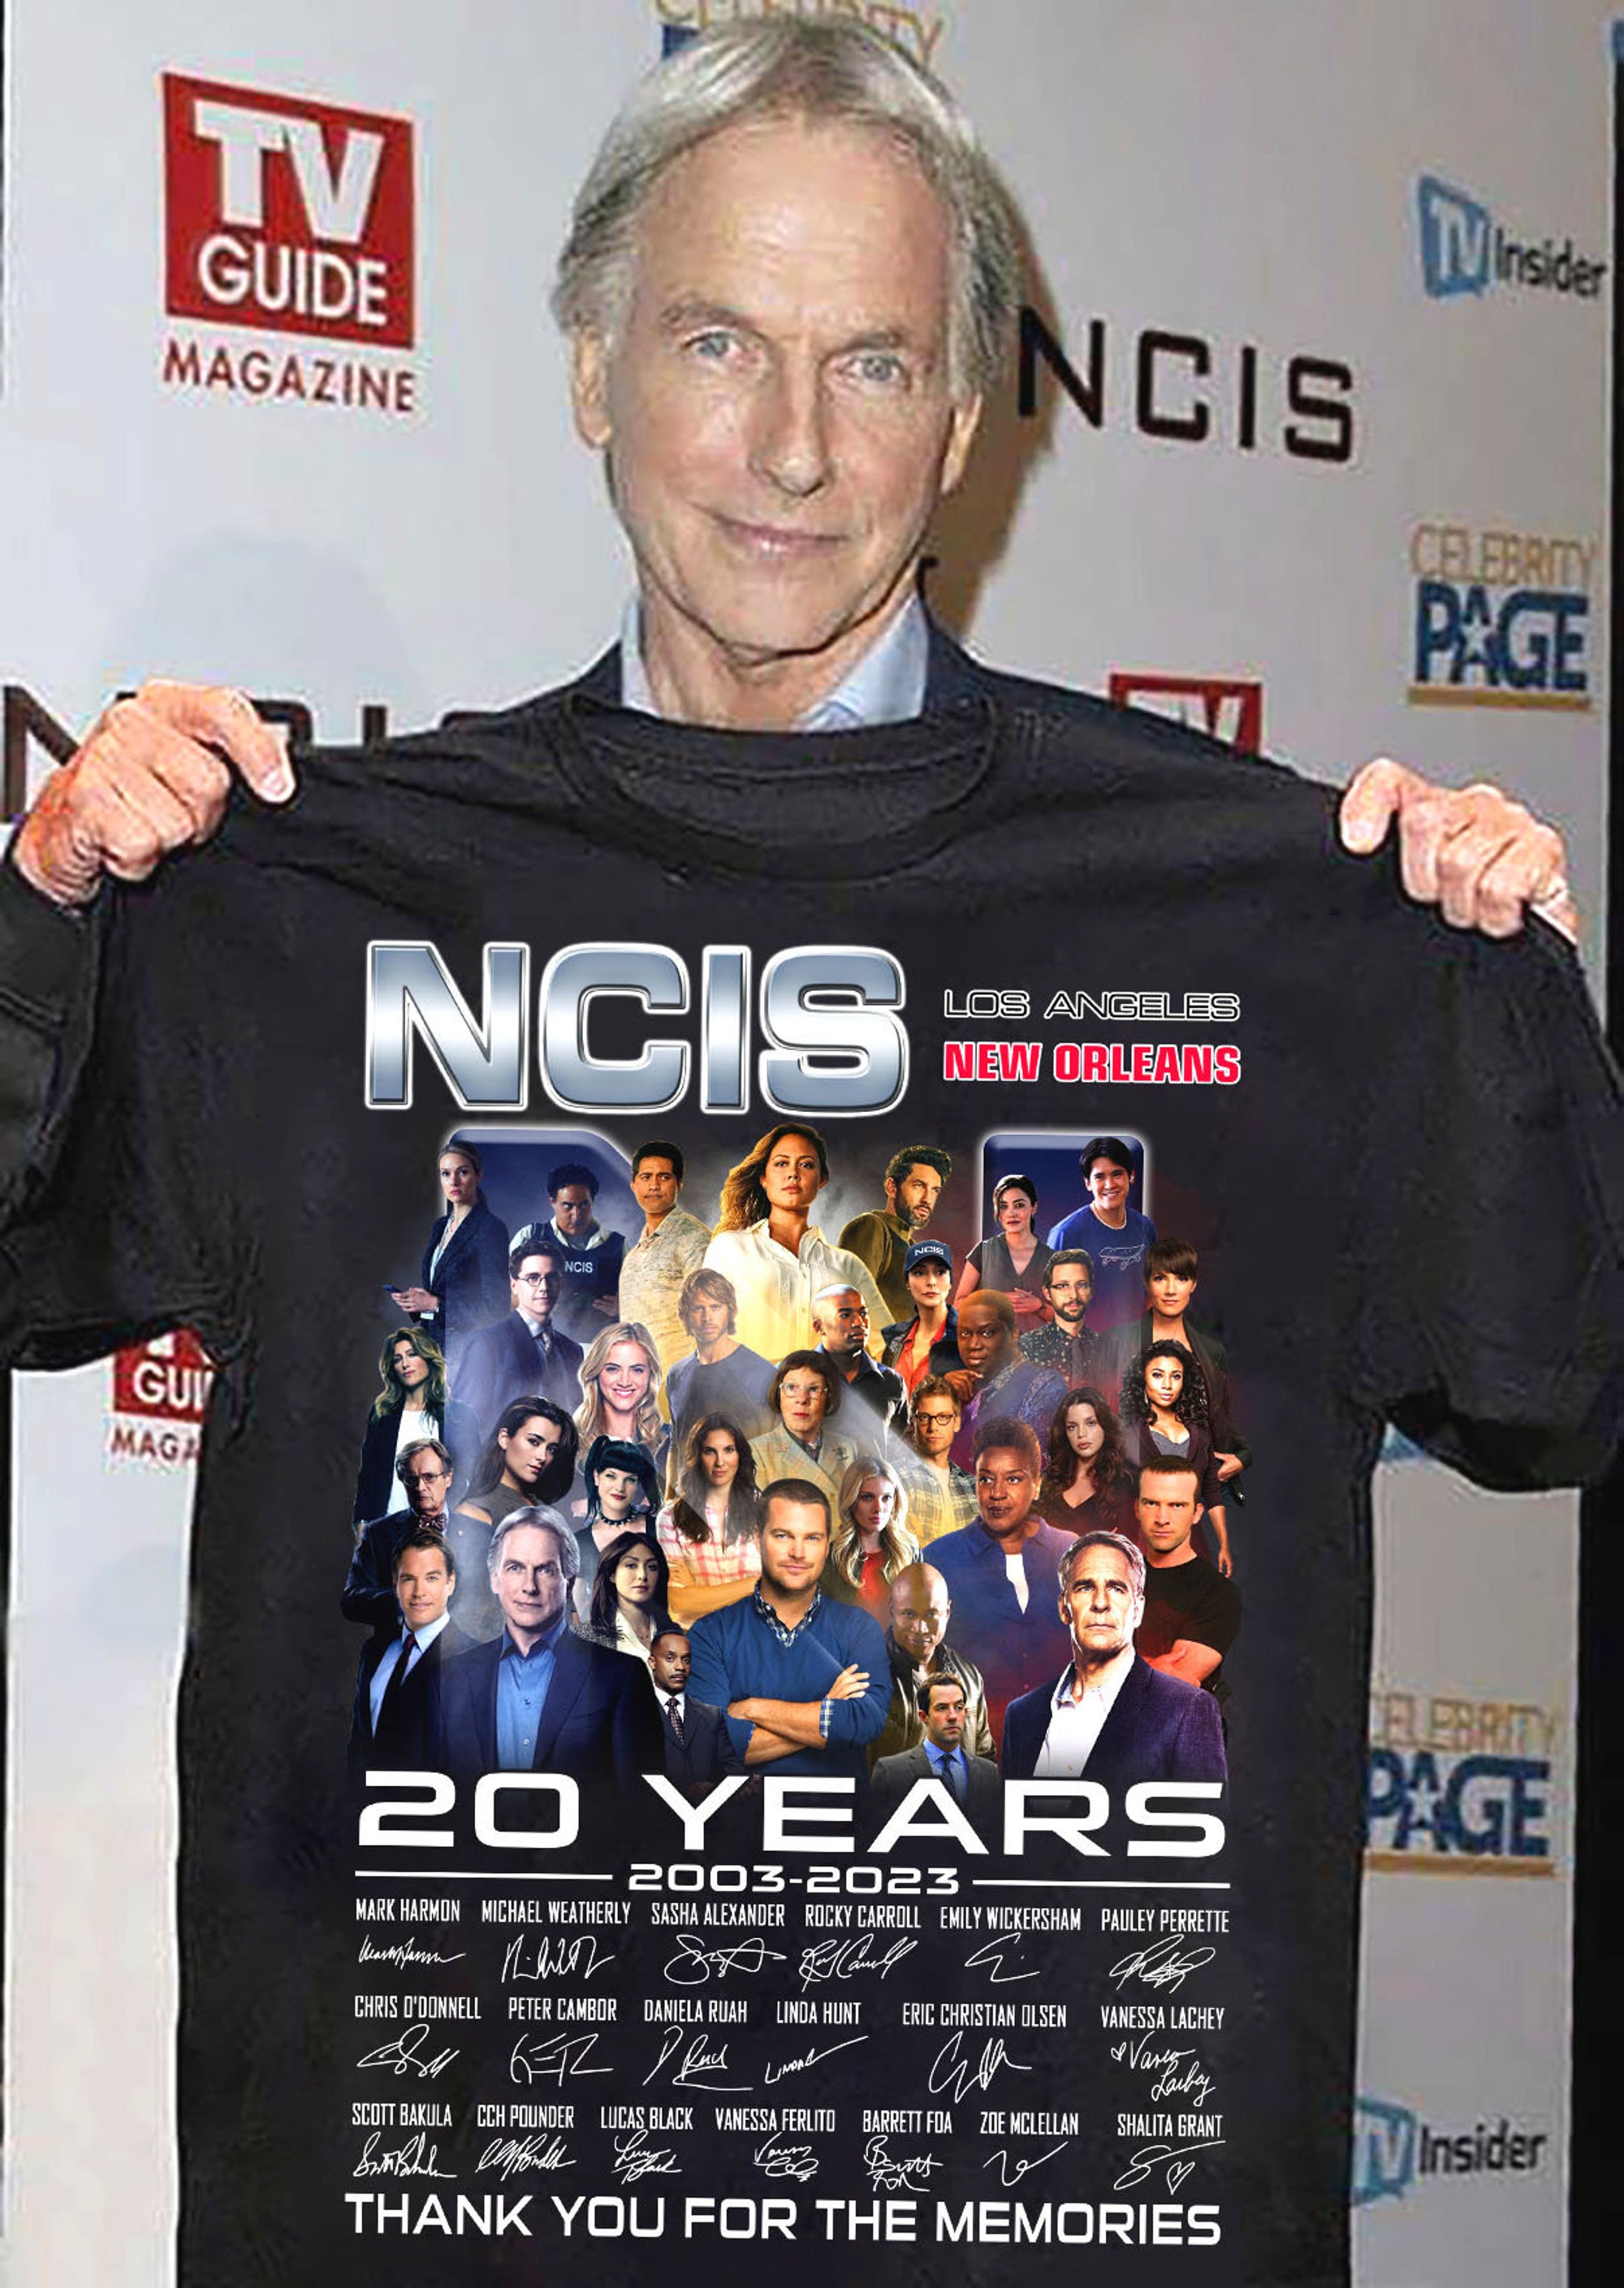 Discover Ncis Los Angeles New Orleans 20 Years 2003 2023, Ncis 20 Years T-Shirt